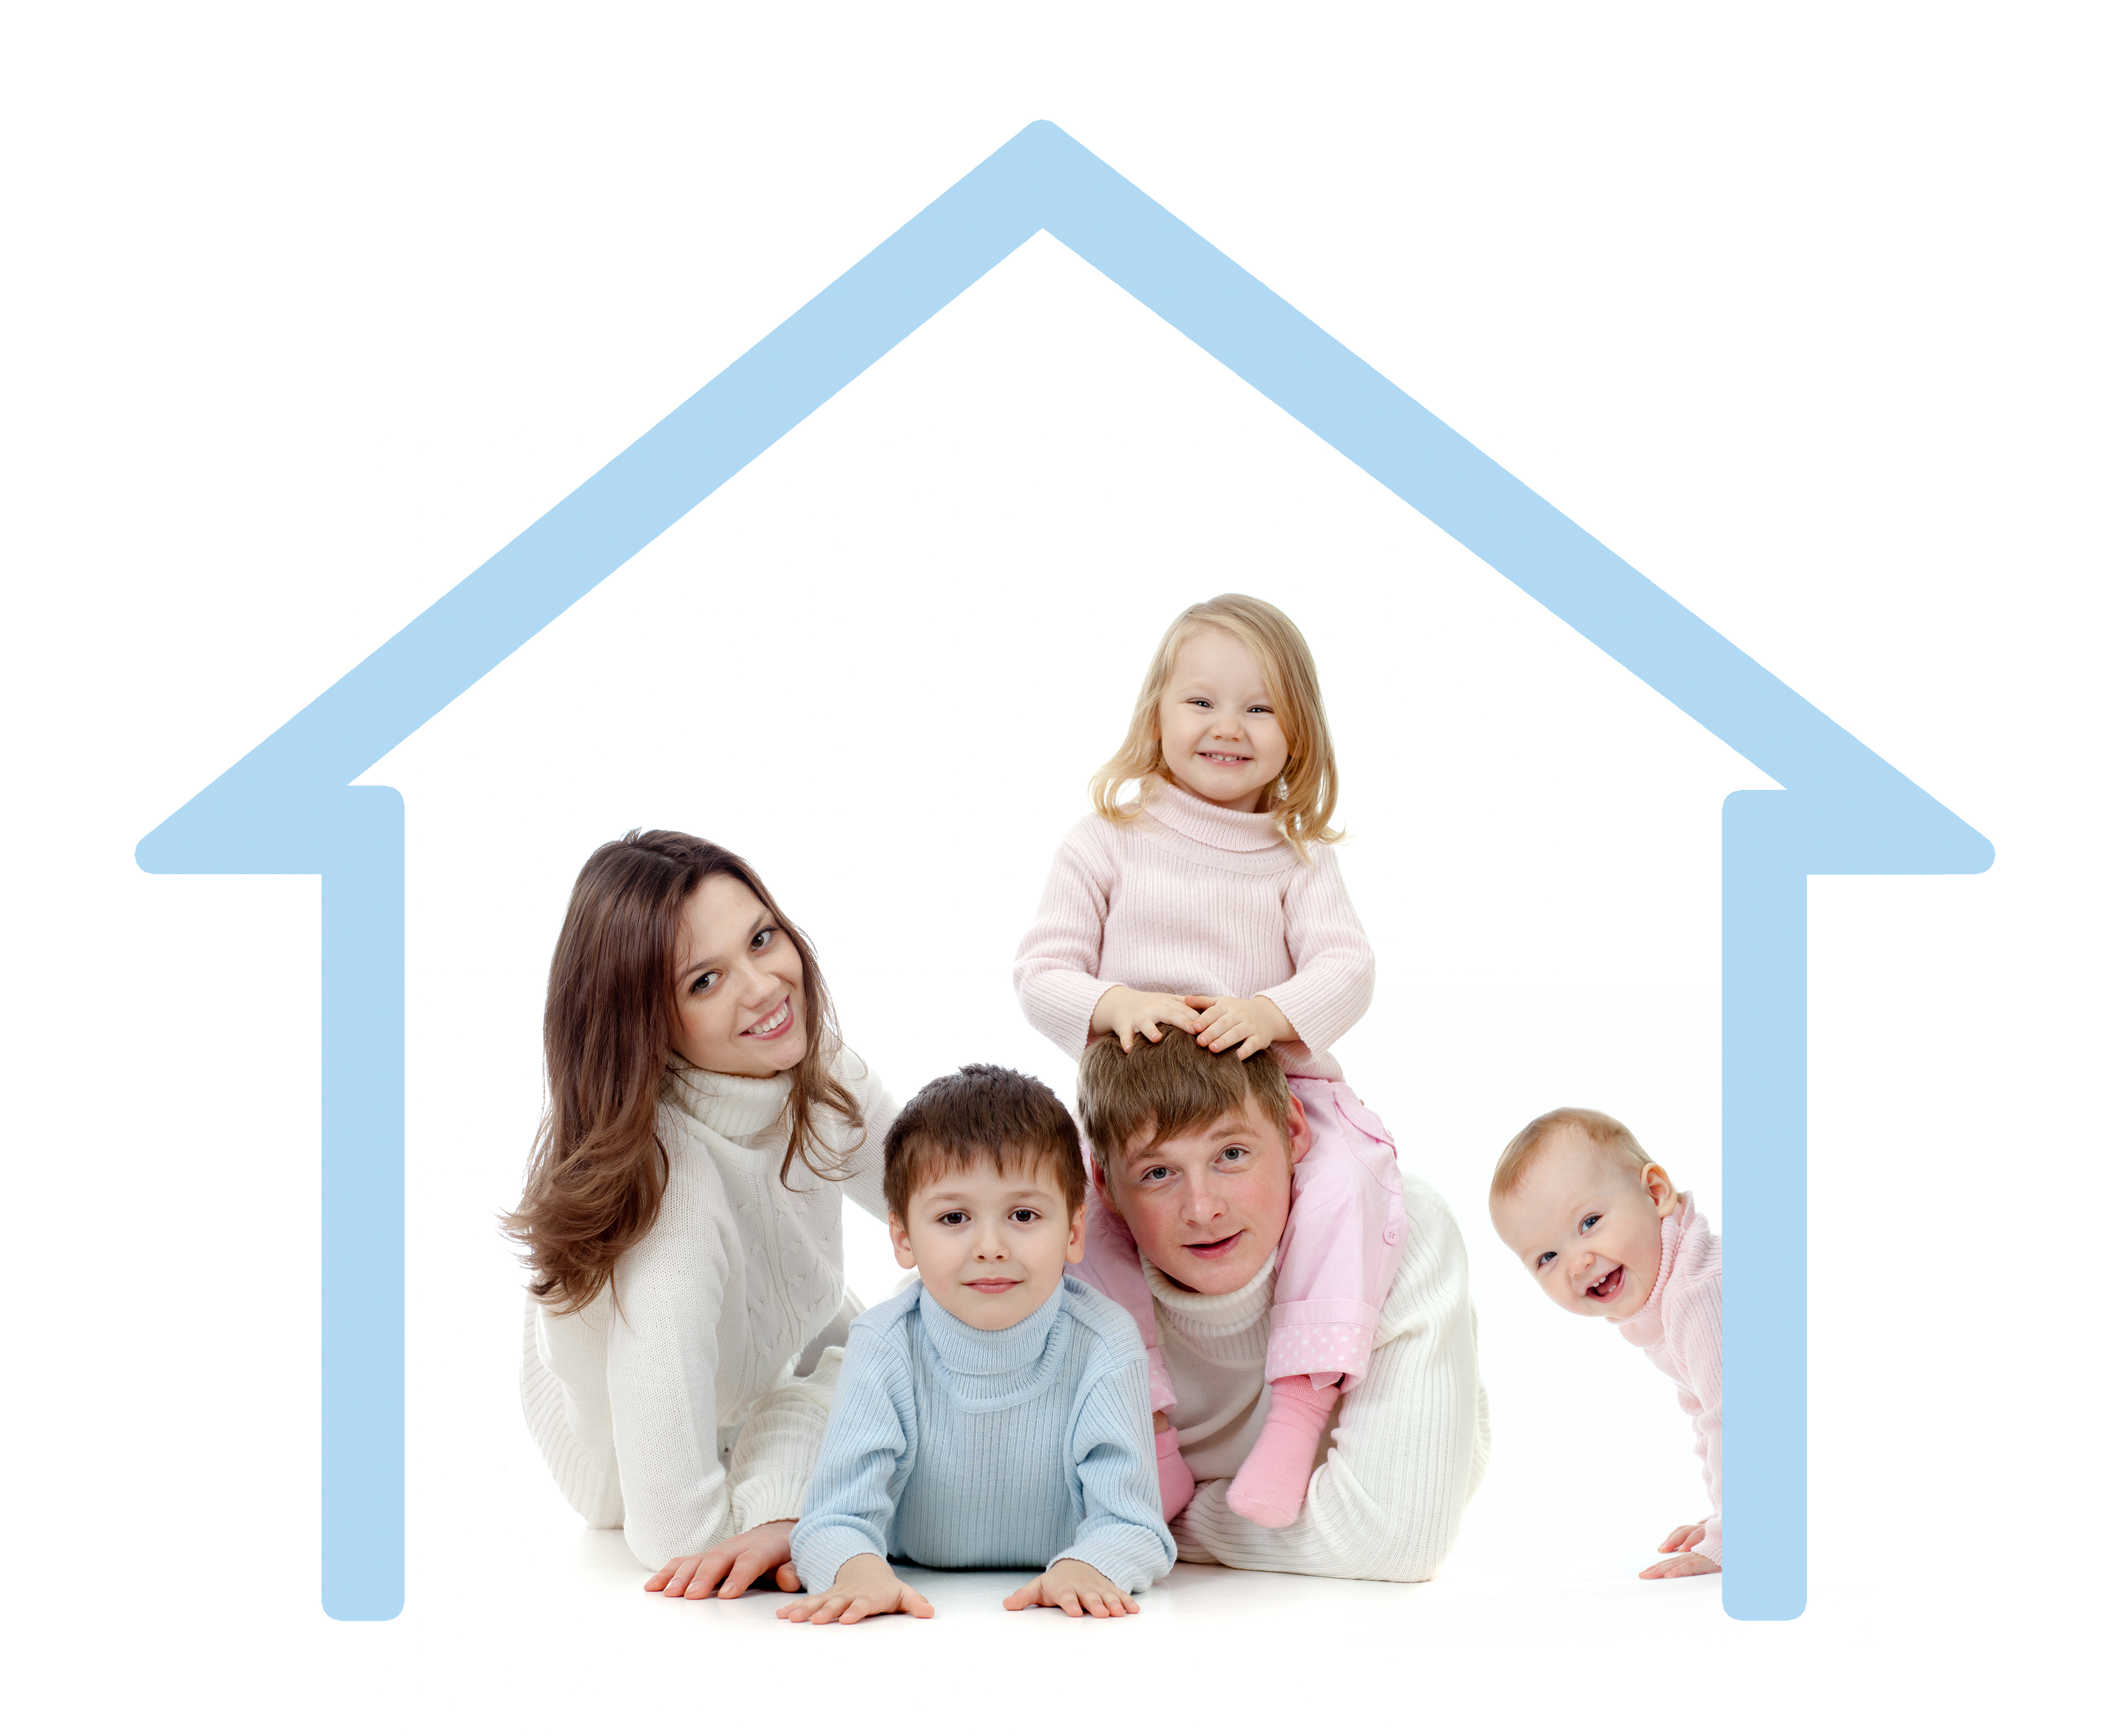 Is Mortgage Life Insurance practical?